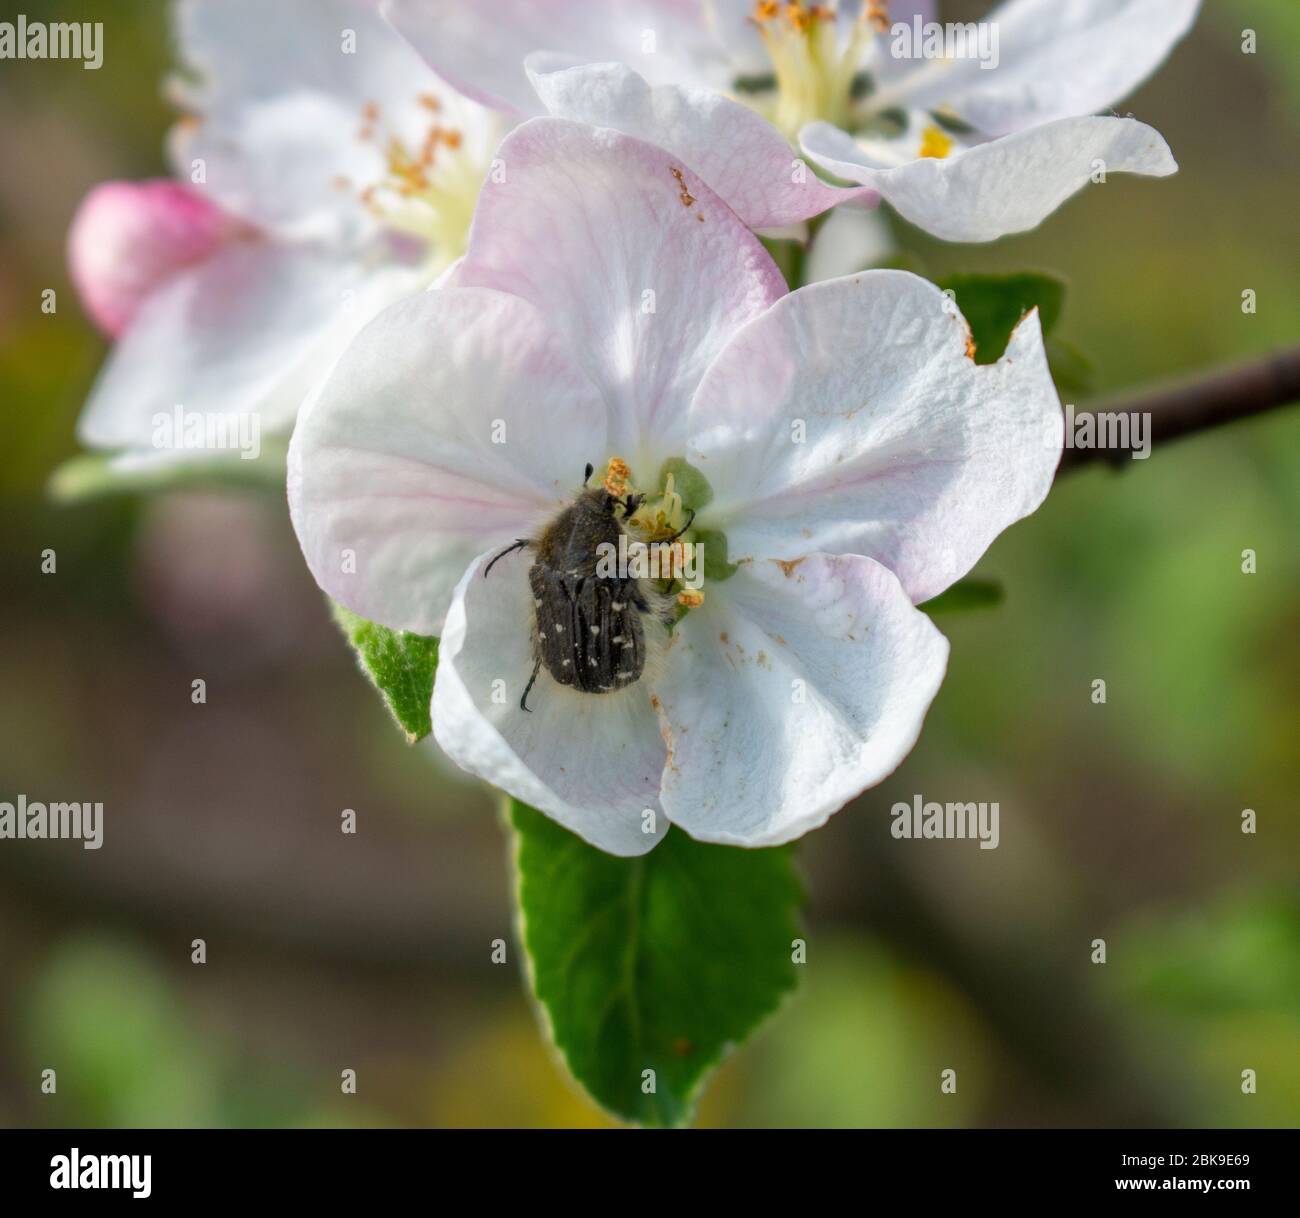 Destruction of the fruit harvest of apples by the insect Tropinota hirta, a pest that feeds on inflorescences. Stock Photo